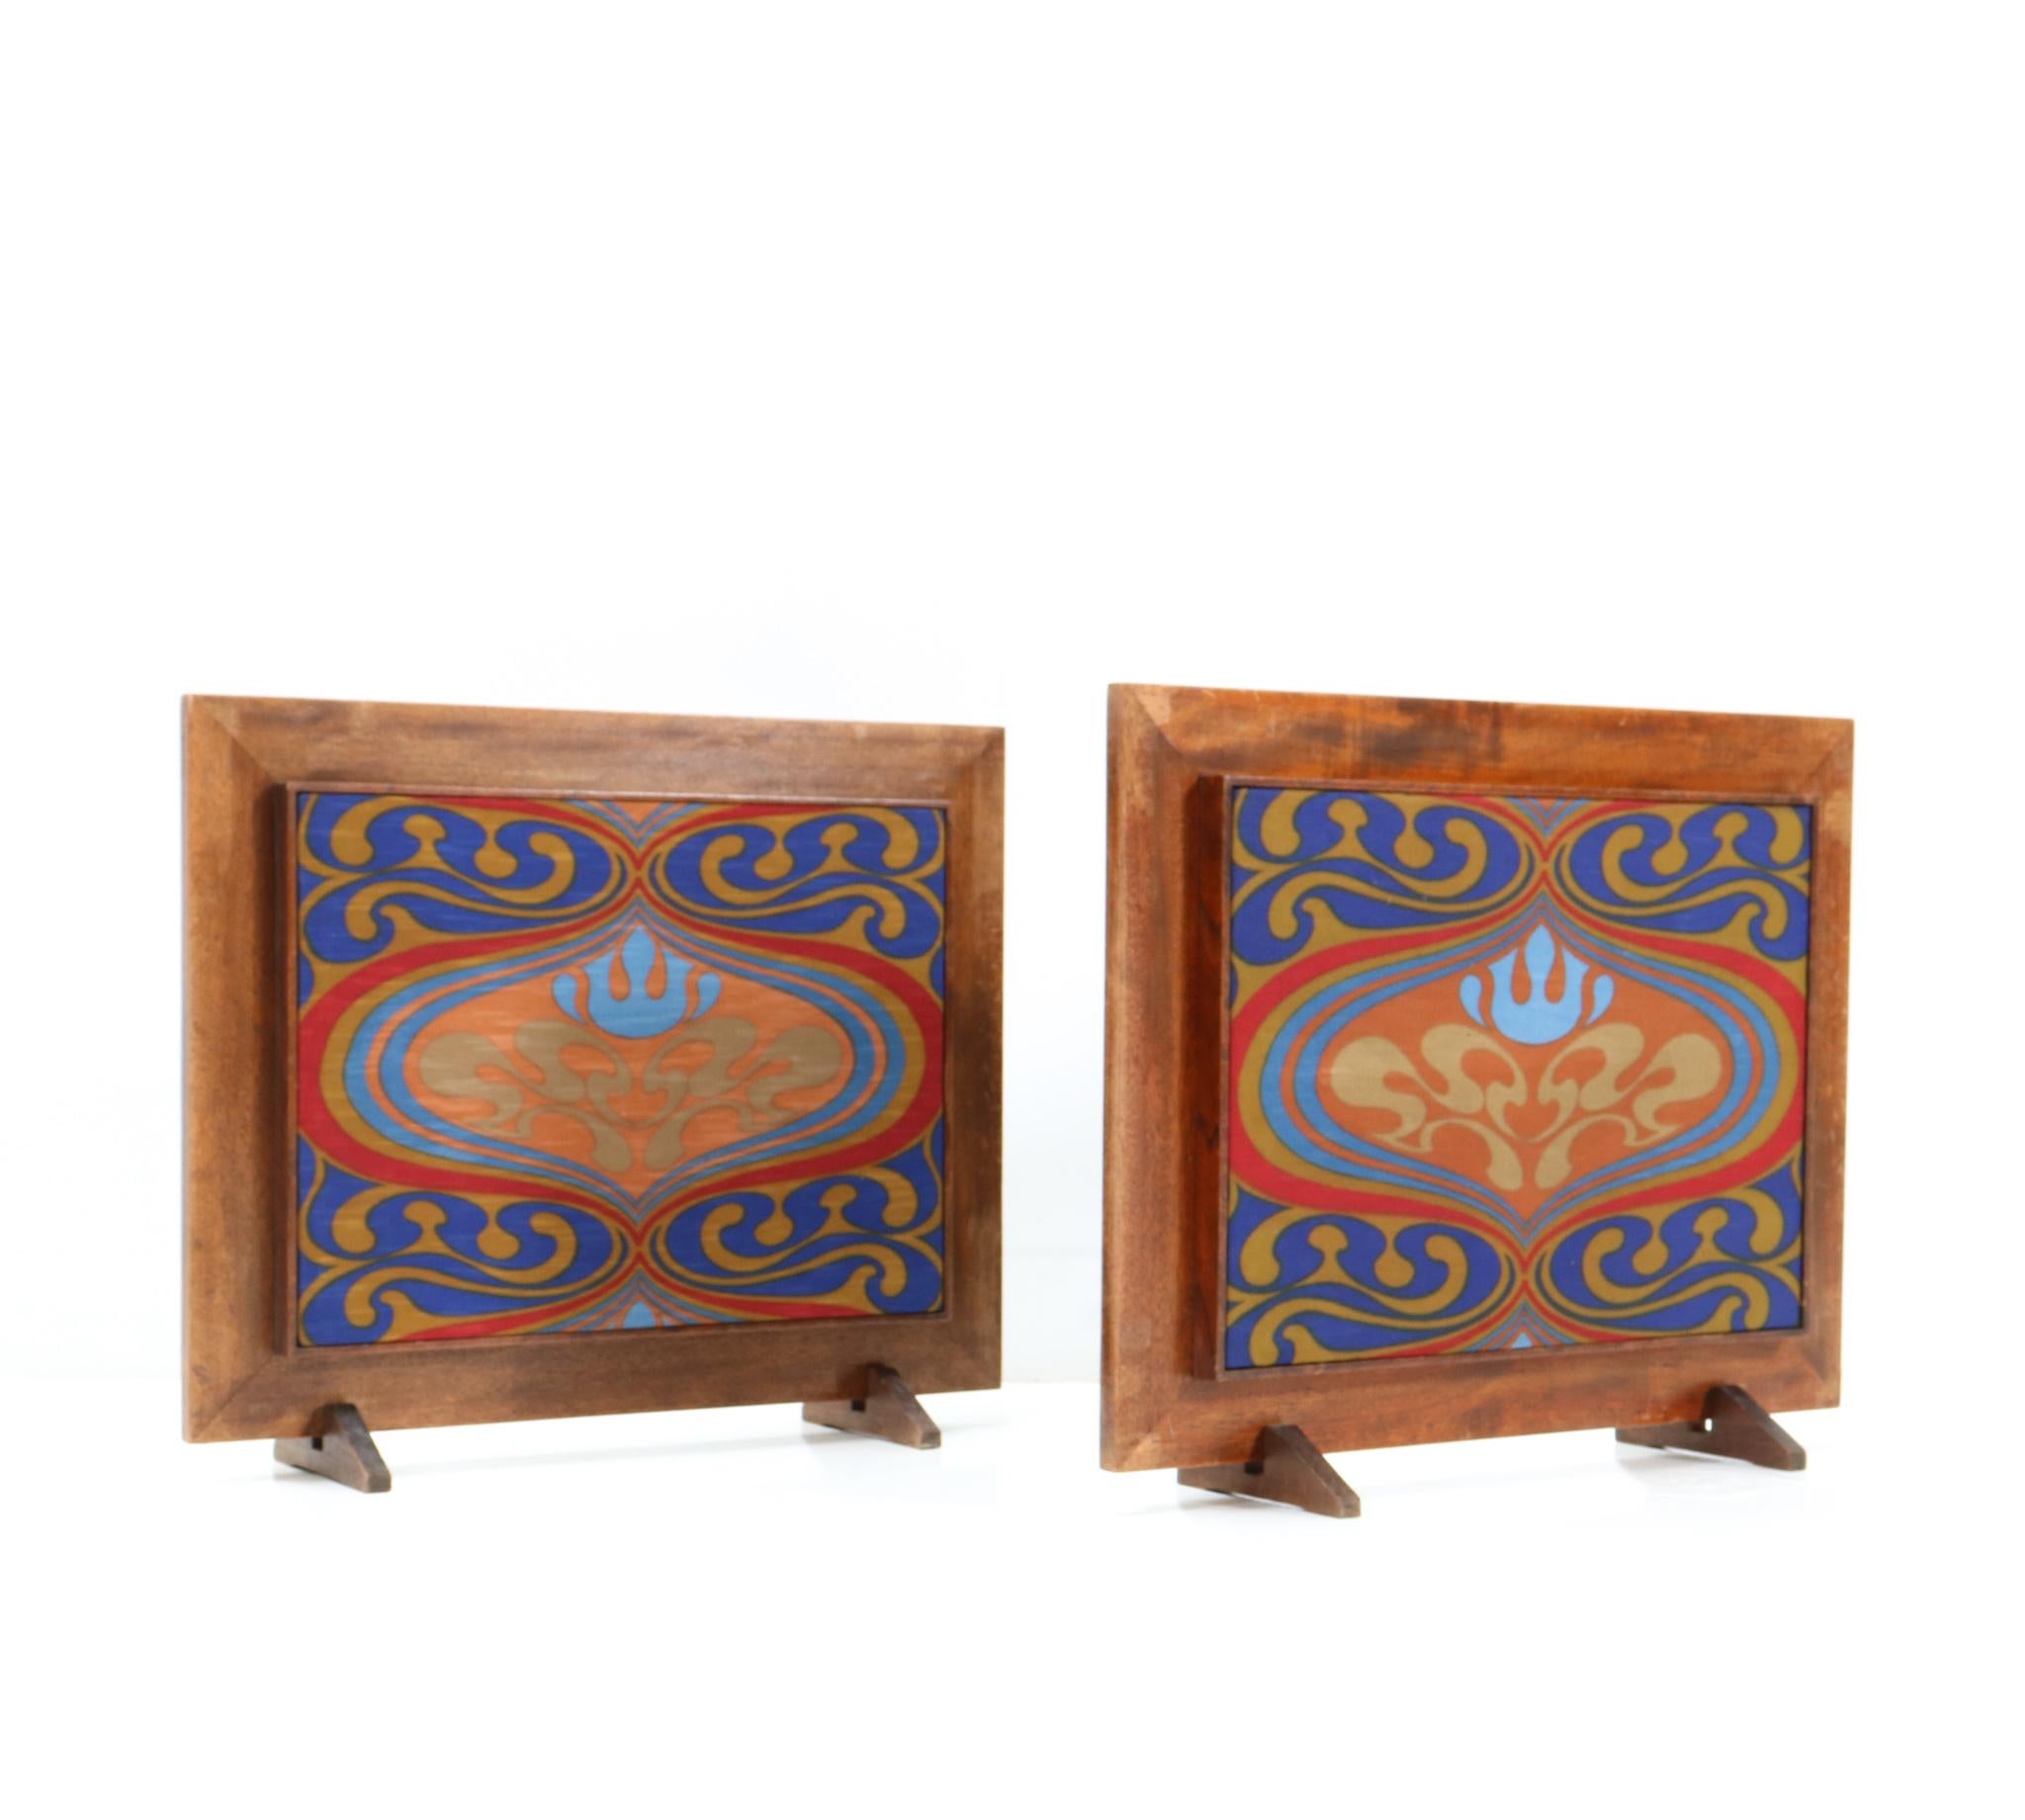 Stunning pair of Vintage Planex Sound Panels speakers.
Design by Fisher Argentina.
Model PL-5-R and marked with original manufacturers label.
Walnut frames with hand-painted swirl decorations.
This wonderful pair of Planex Sound Panels by Fisher